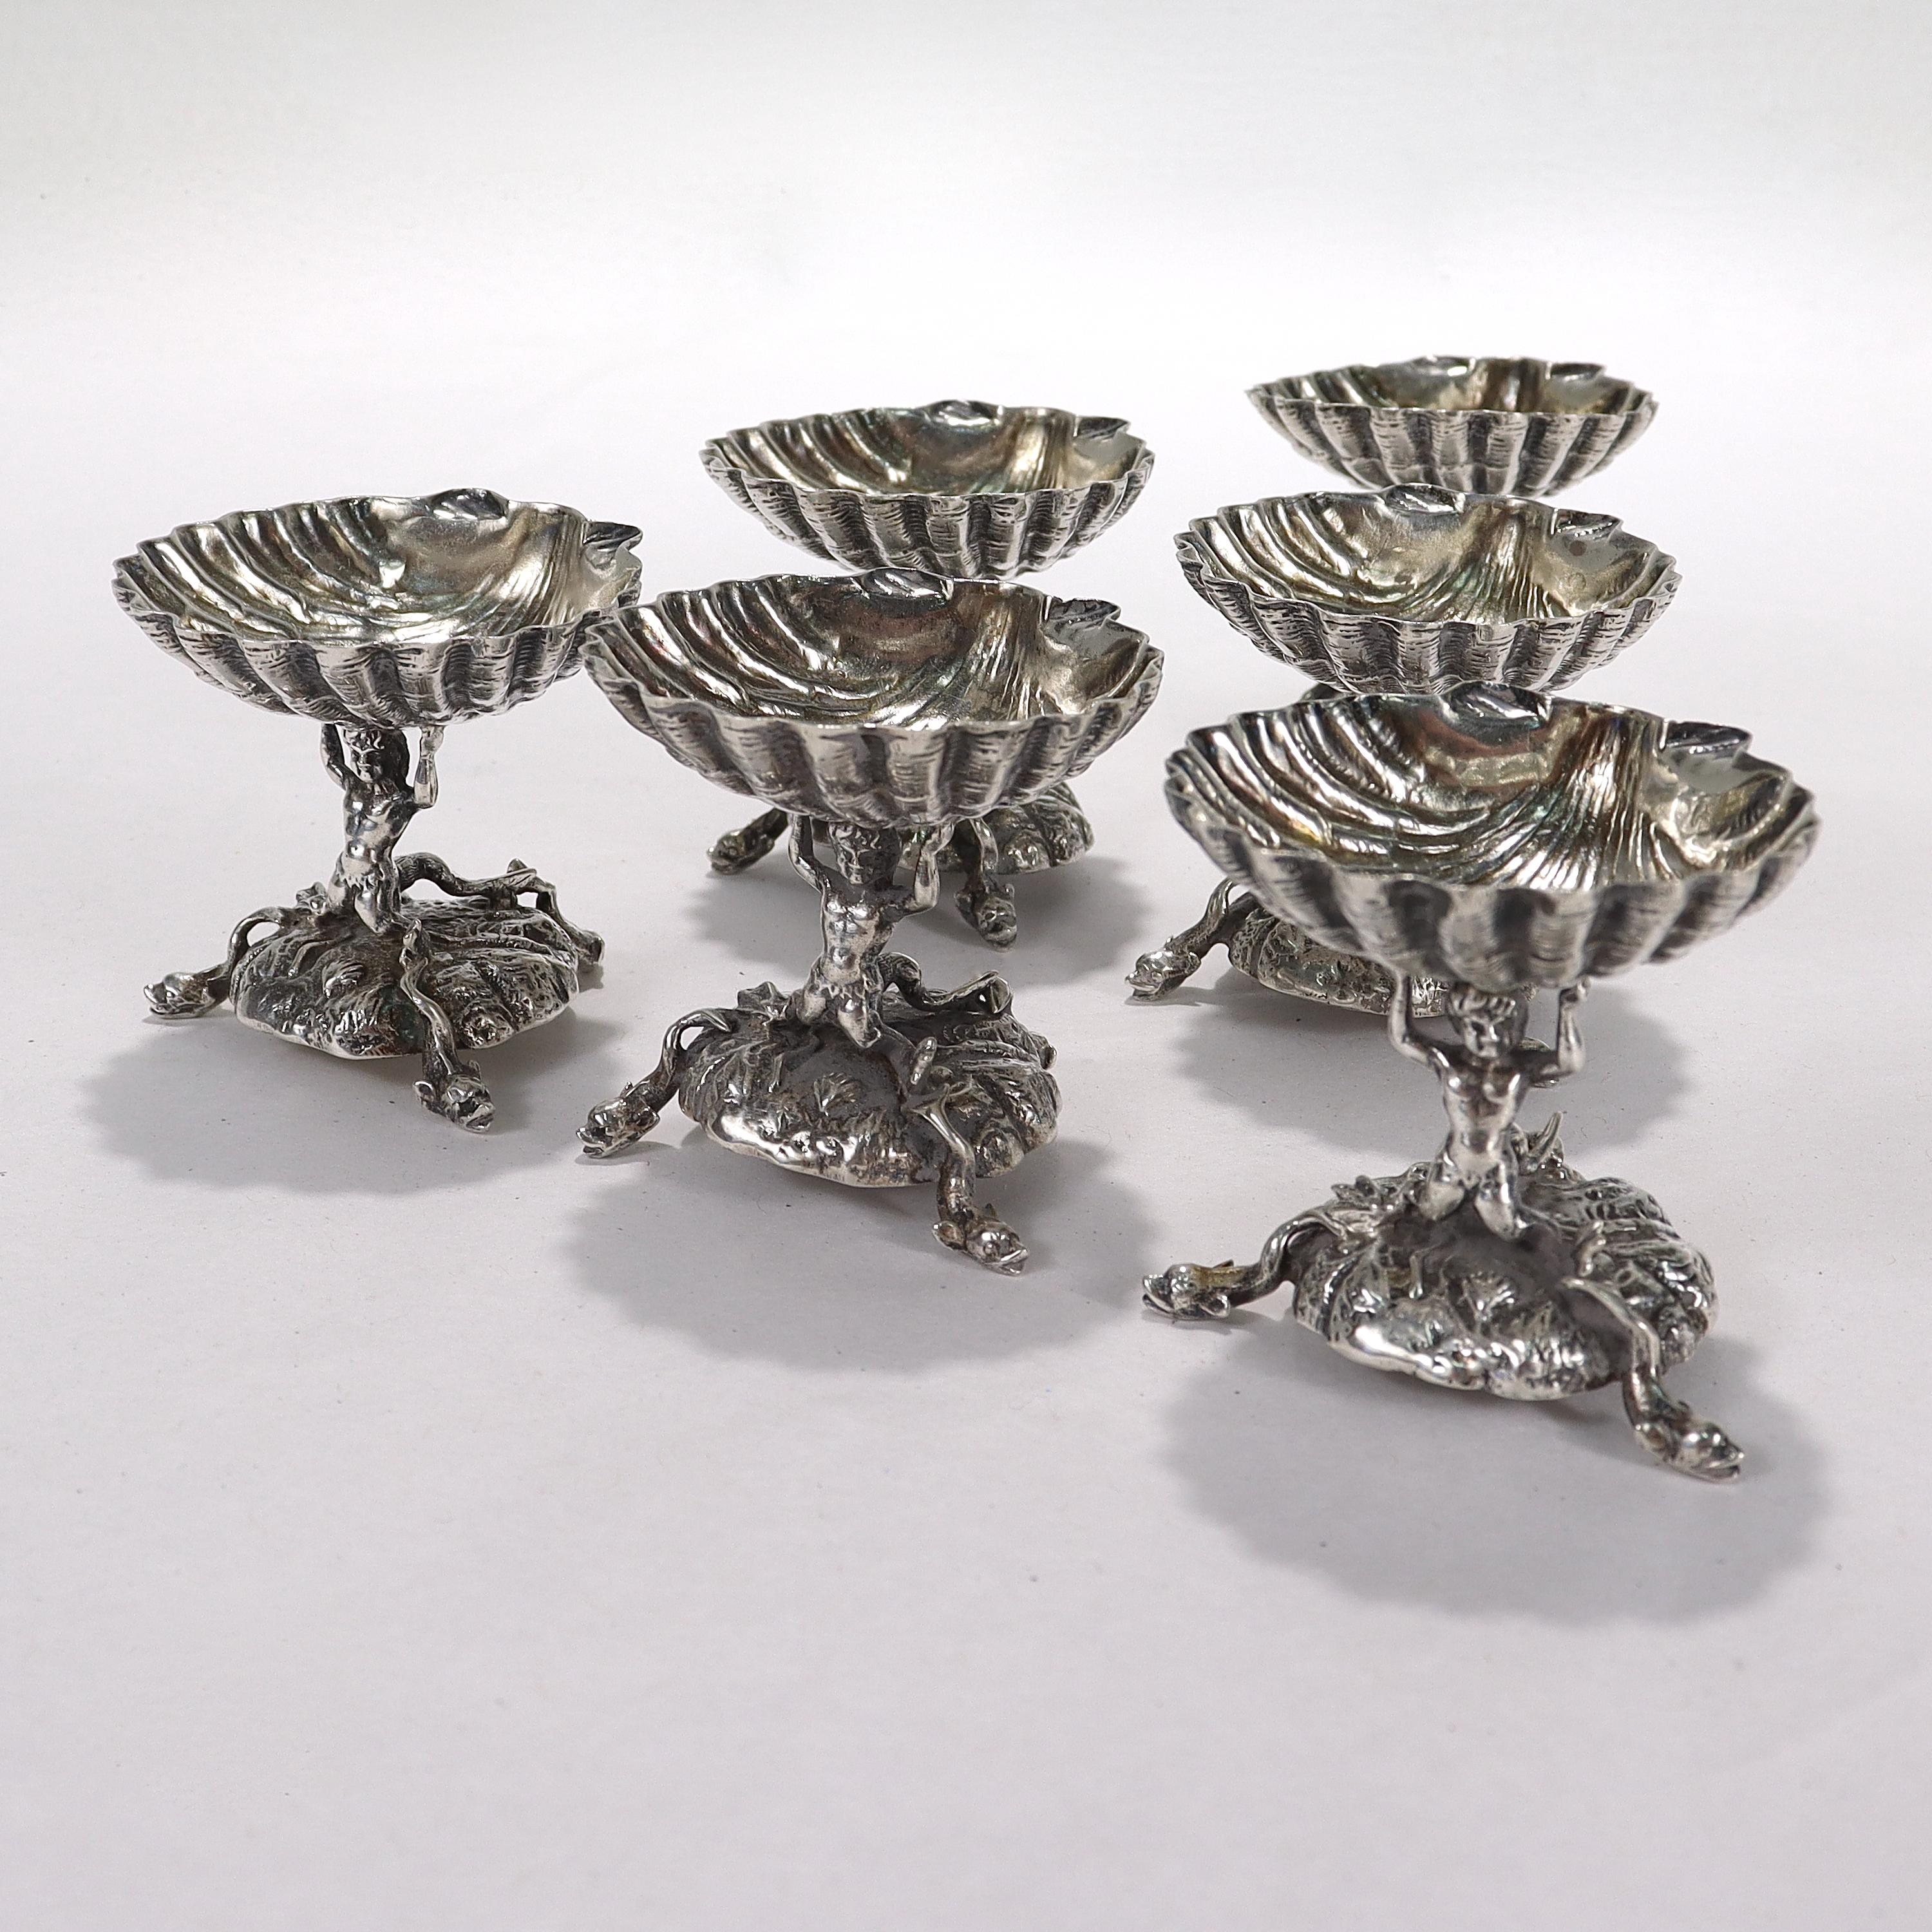 A fine set of 6 salt cellars.

By Fratelli Coppini.

In .800 Italian silver.

In the form of a seashell held atop the shoulders of a mermaid/merman. The base is supported by 3 figural dolphin feet.

Simply a lovely set of nautical themed salt